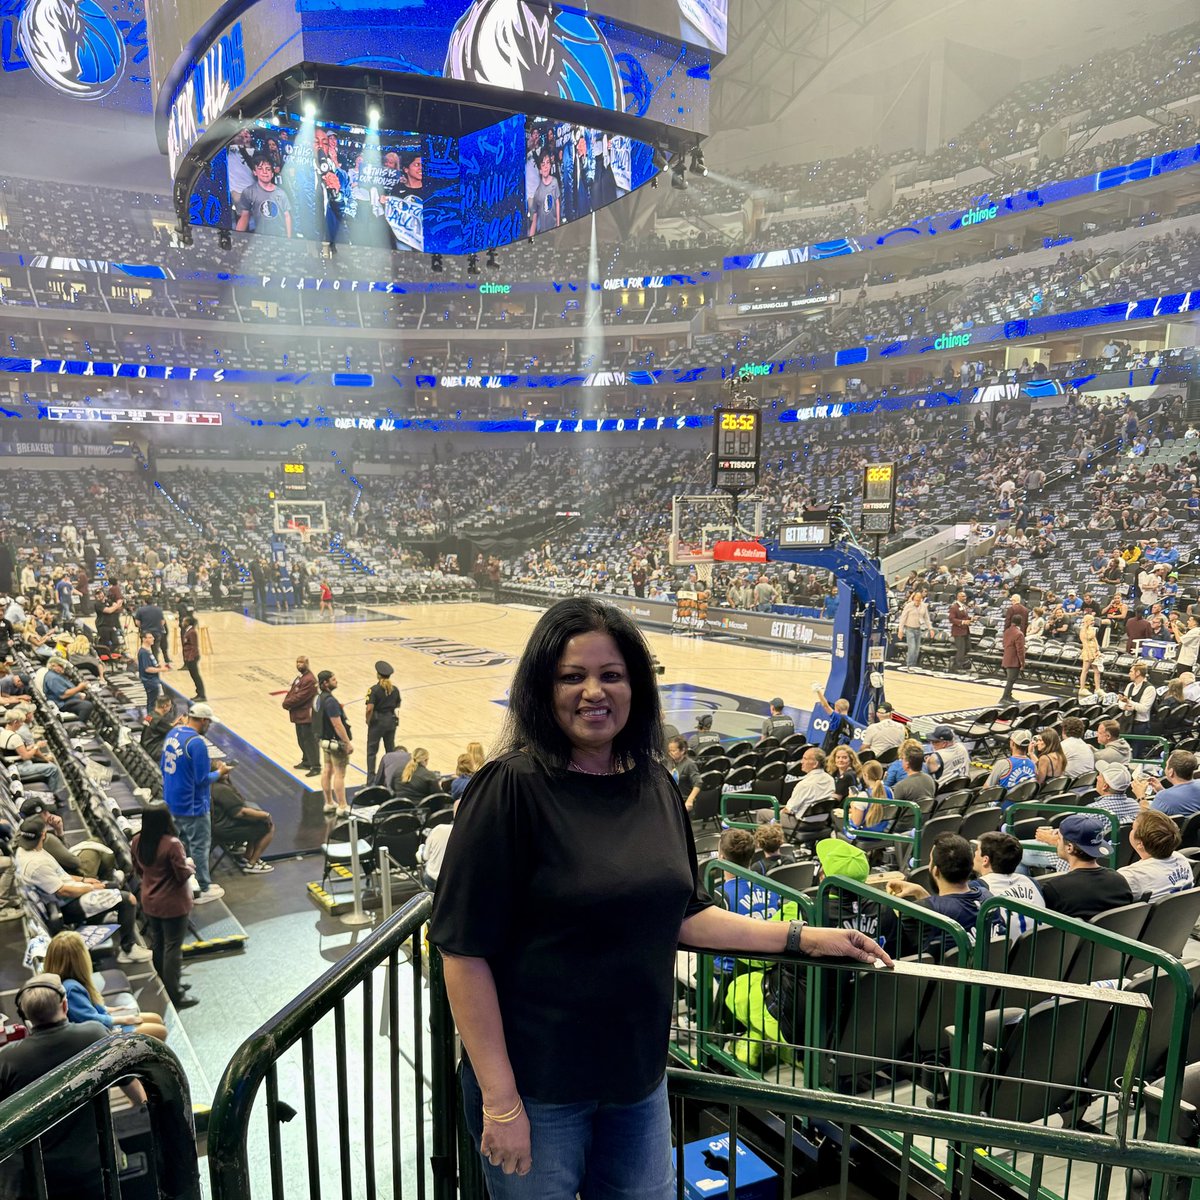 Took my mom to her first #Mavs game yesterday. She had such a great time!

She immigrated to the U.S. in 1984 and this was her first time attending a pro sporting event. 

Sometimes you have to force your immigrant parents to enjoy things like this.